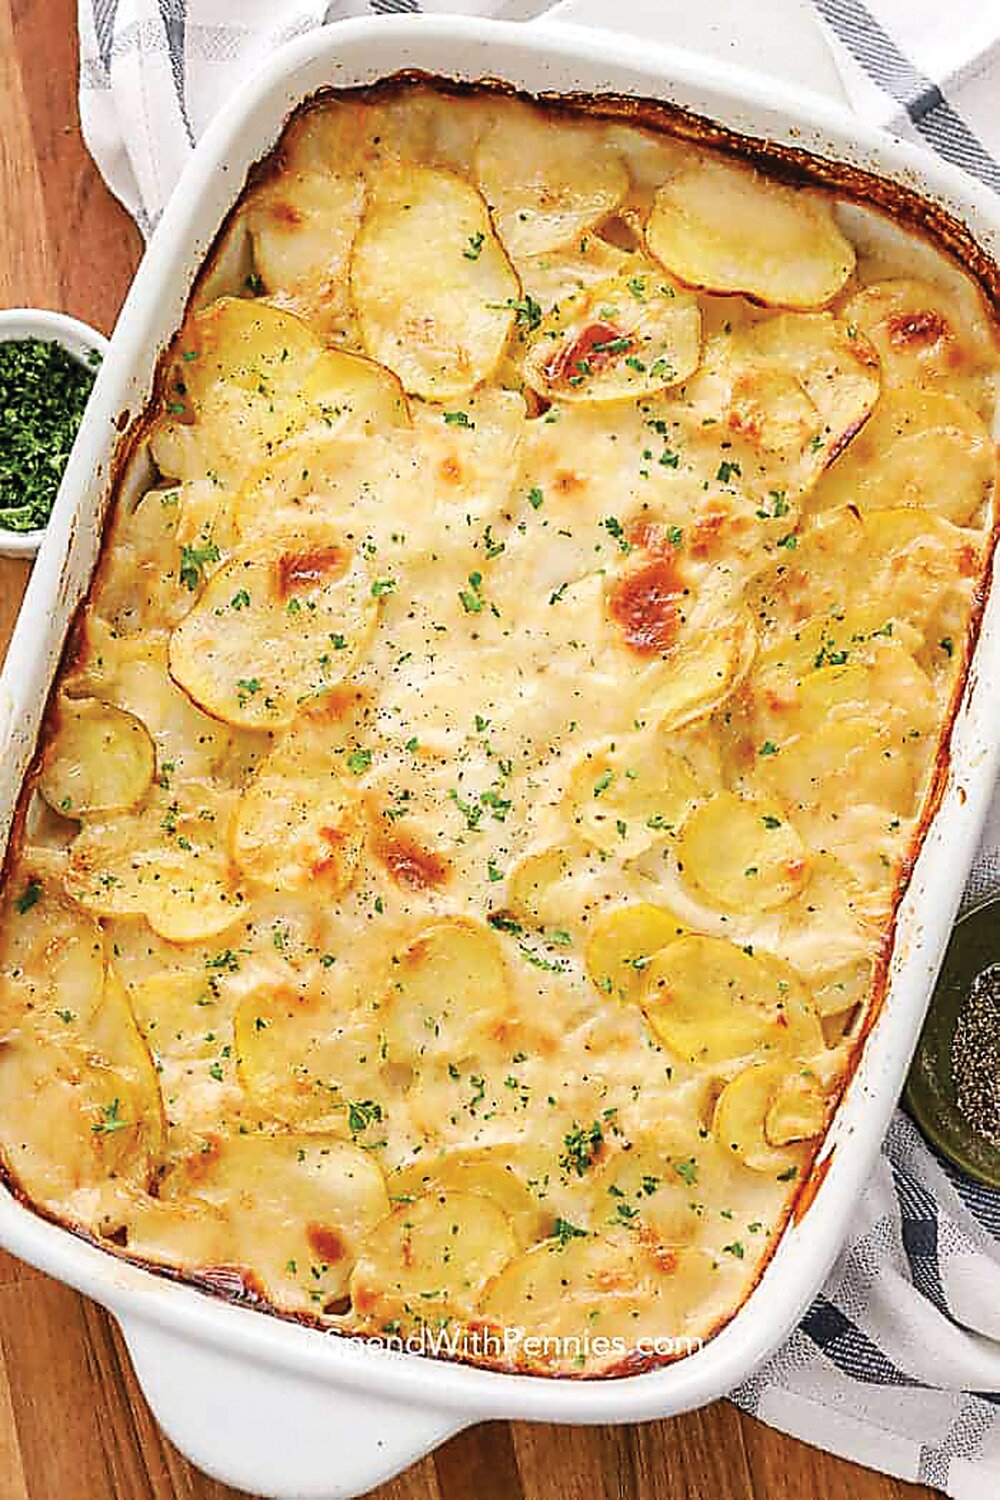 Scalloped potatoes is a popular side dish for Easter dinner or brunch, or anytime.